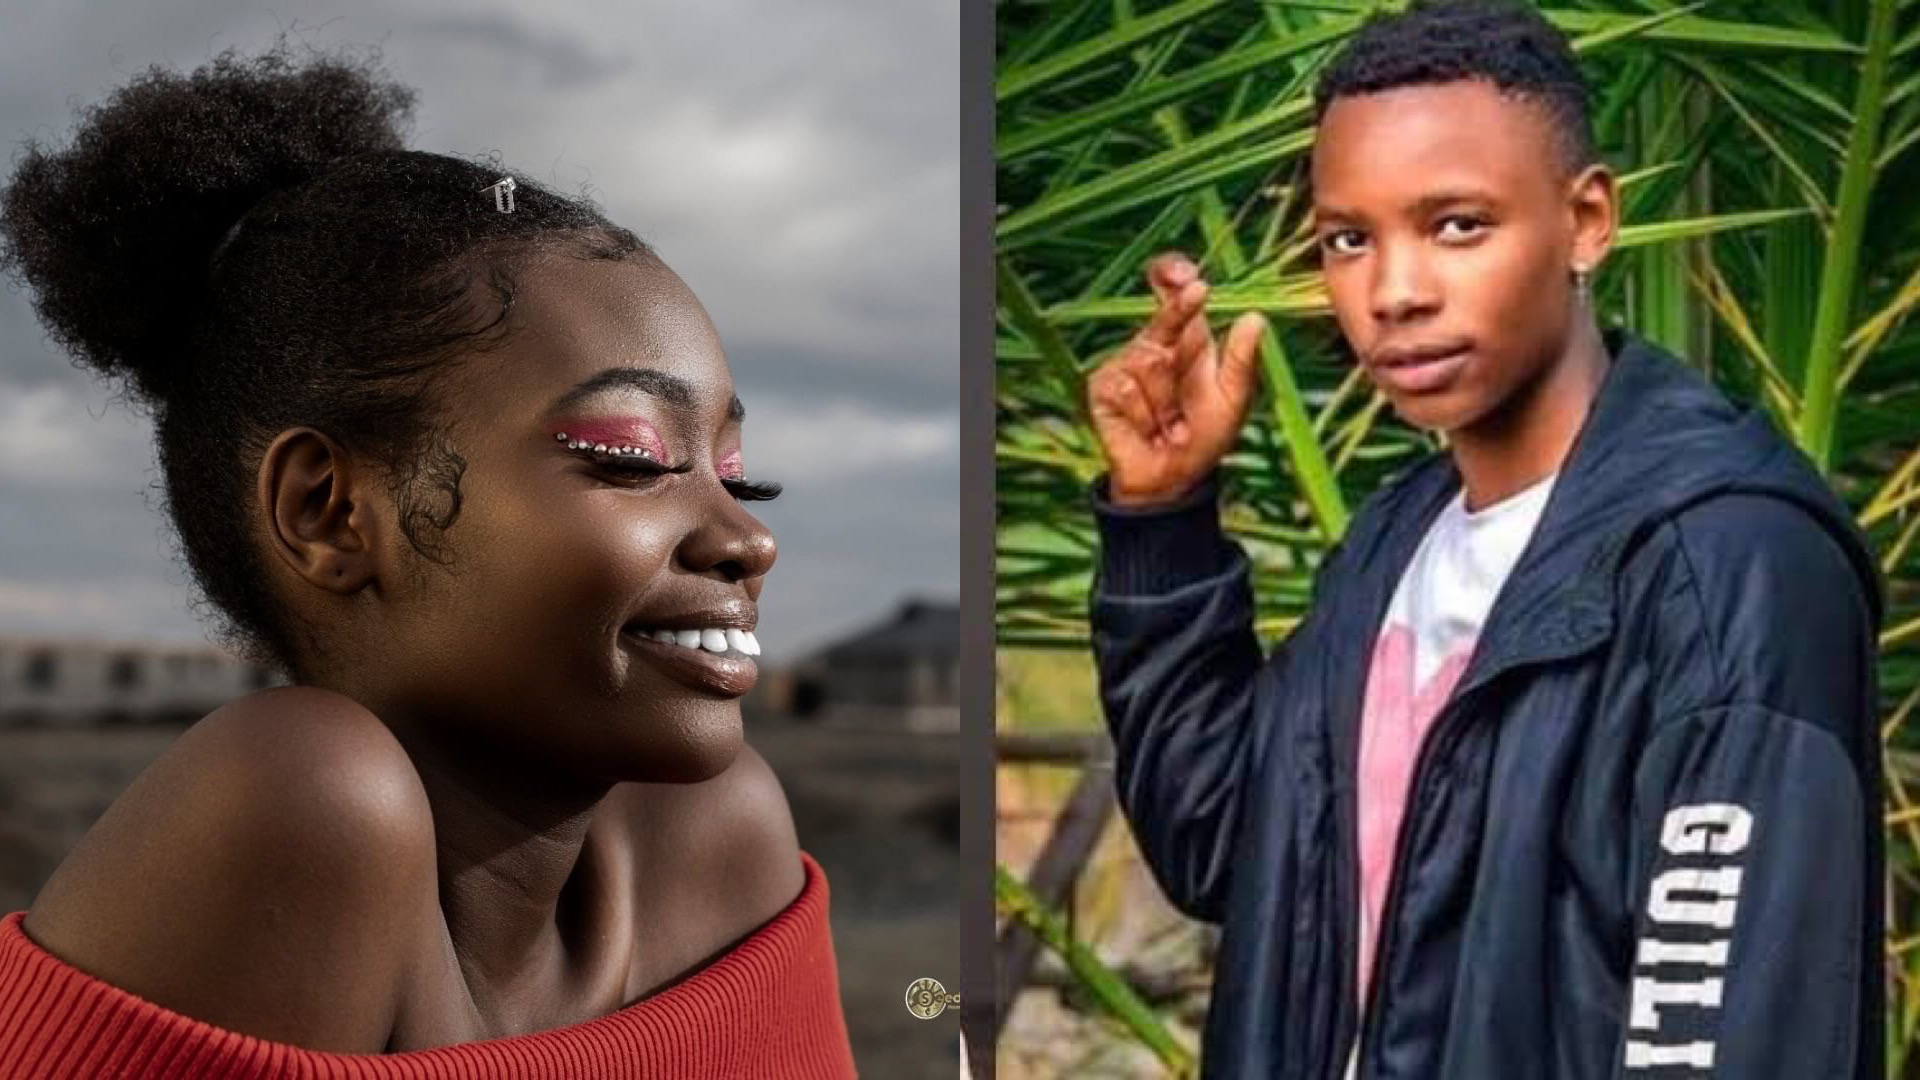 17 year old lady-friend allegedly commits suicide days after Shanty is murdered at Naifest (Photos)